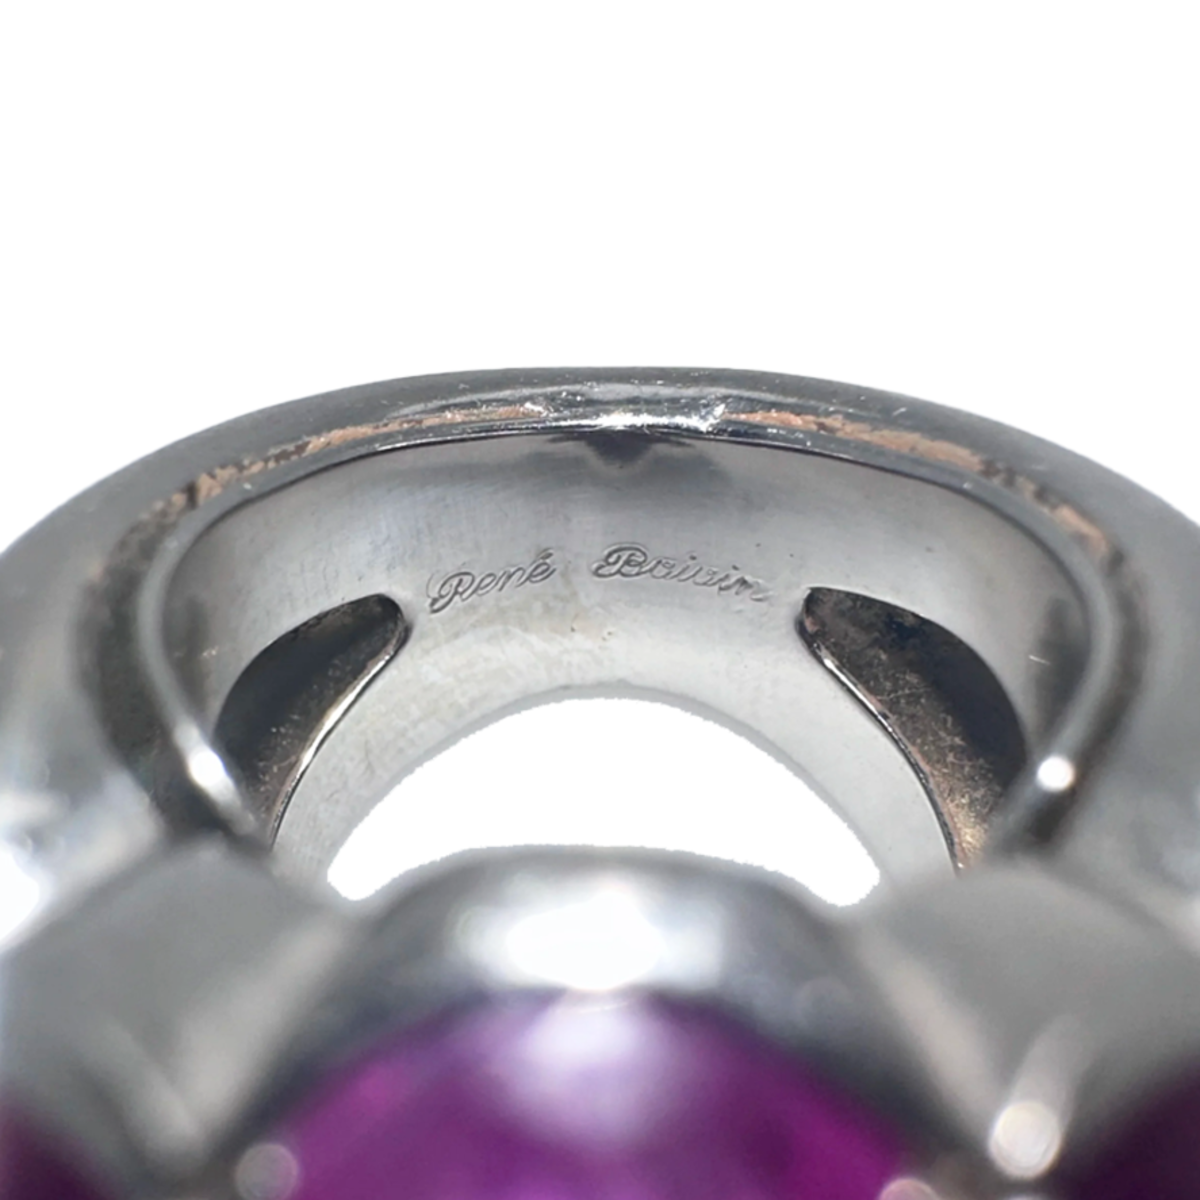 René Boivin 1980s 18KT White Gold Pink Sapphire Ring close-up of signature